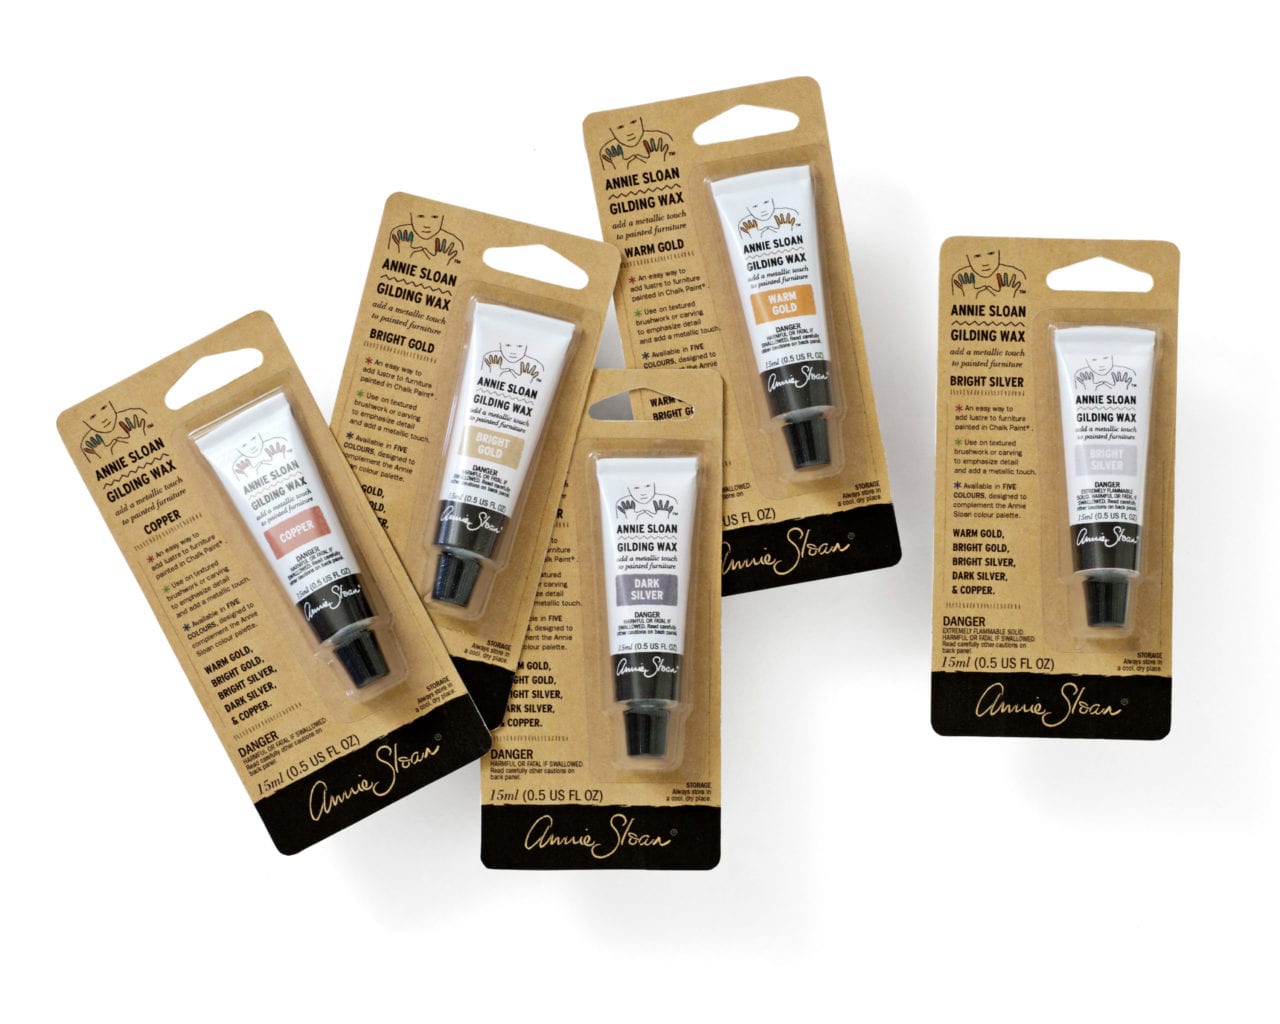 Annie Sloan Gilding Wax 15ml tubes in packaging in Warm and Bright Gold, Dark and Bright Silver and Copper